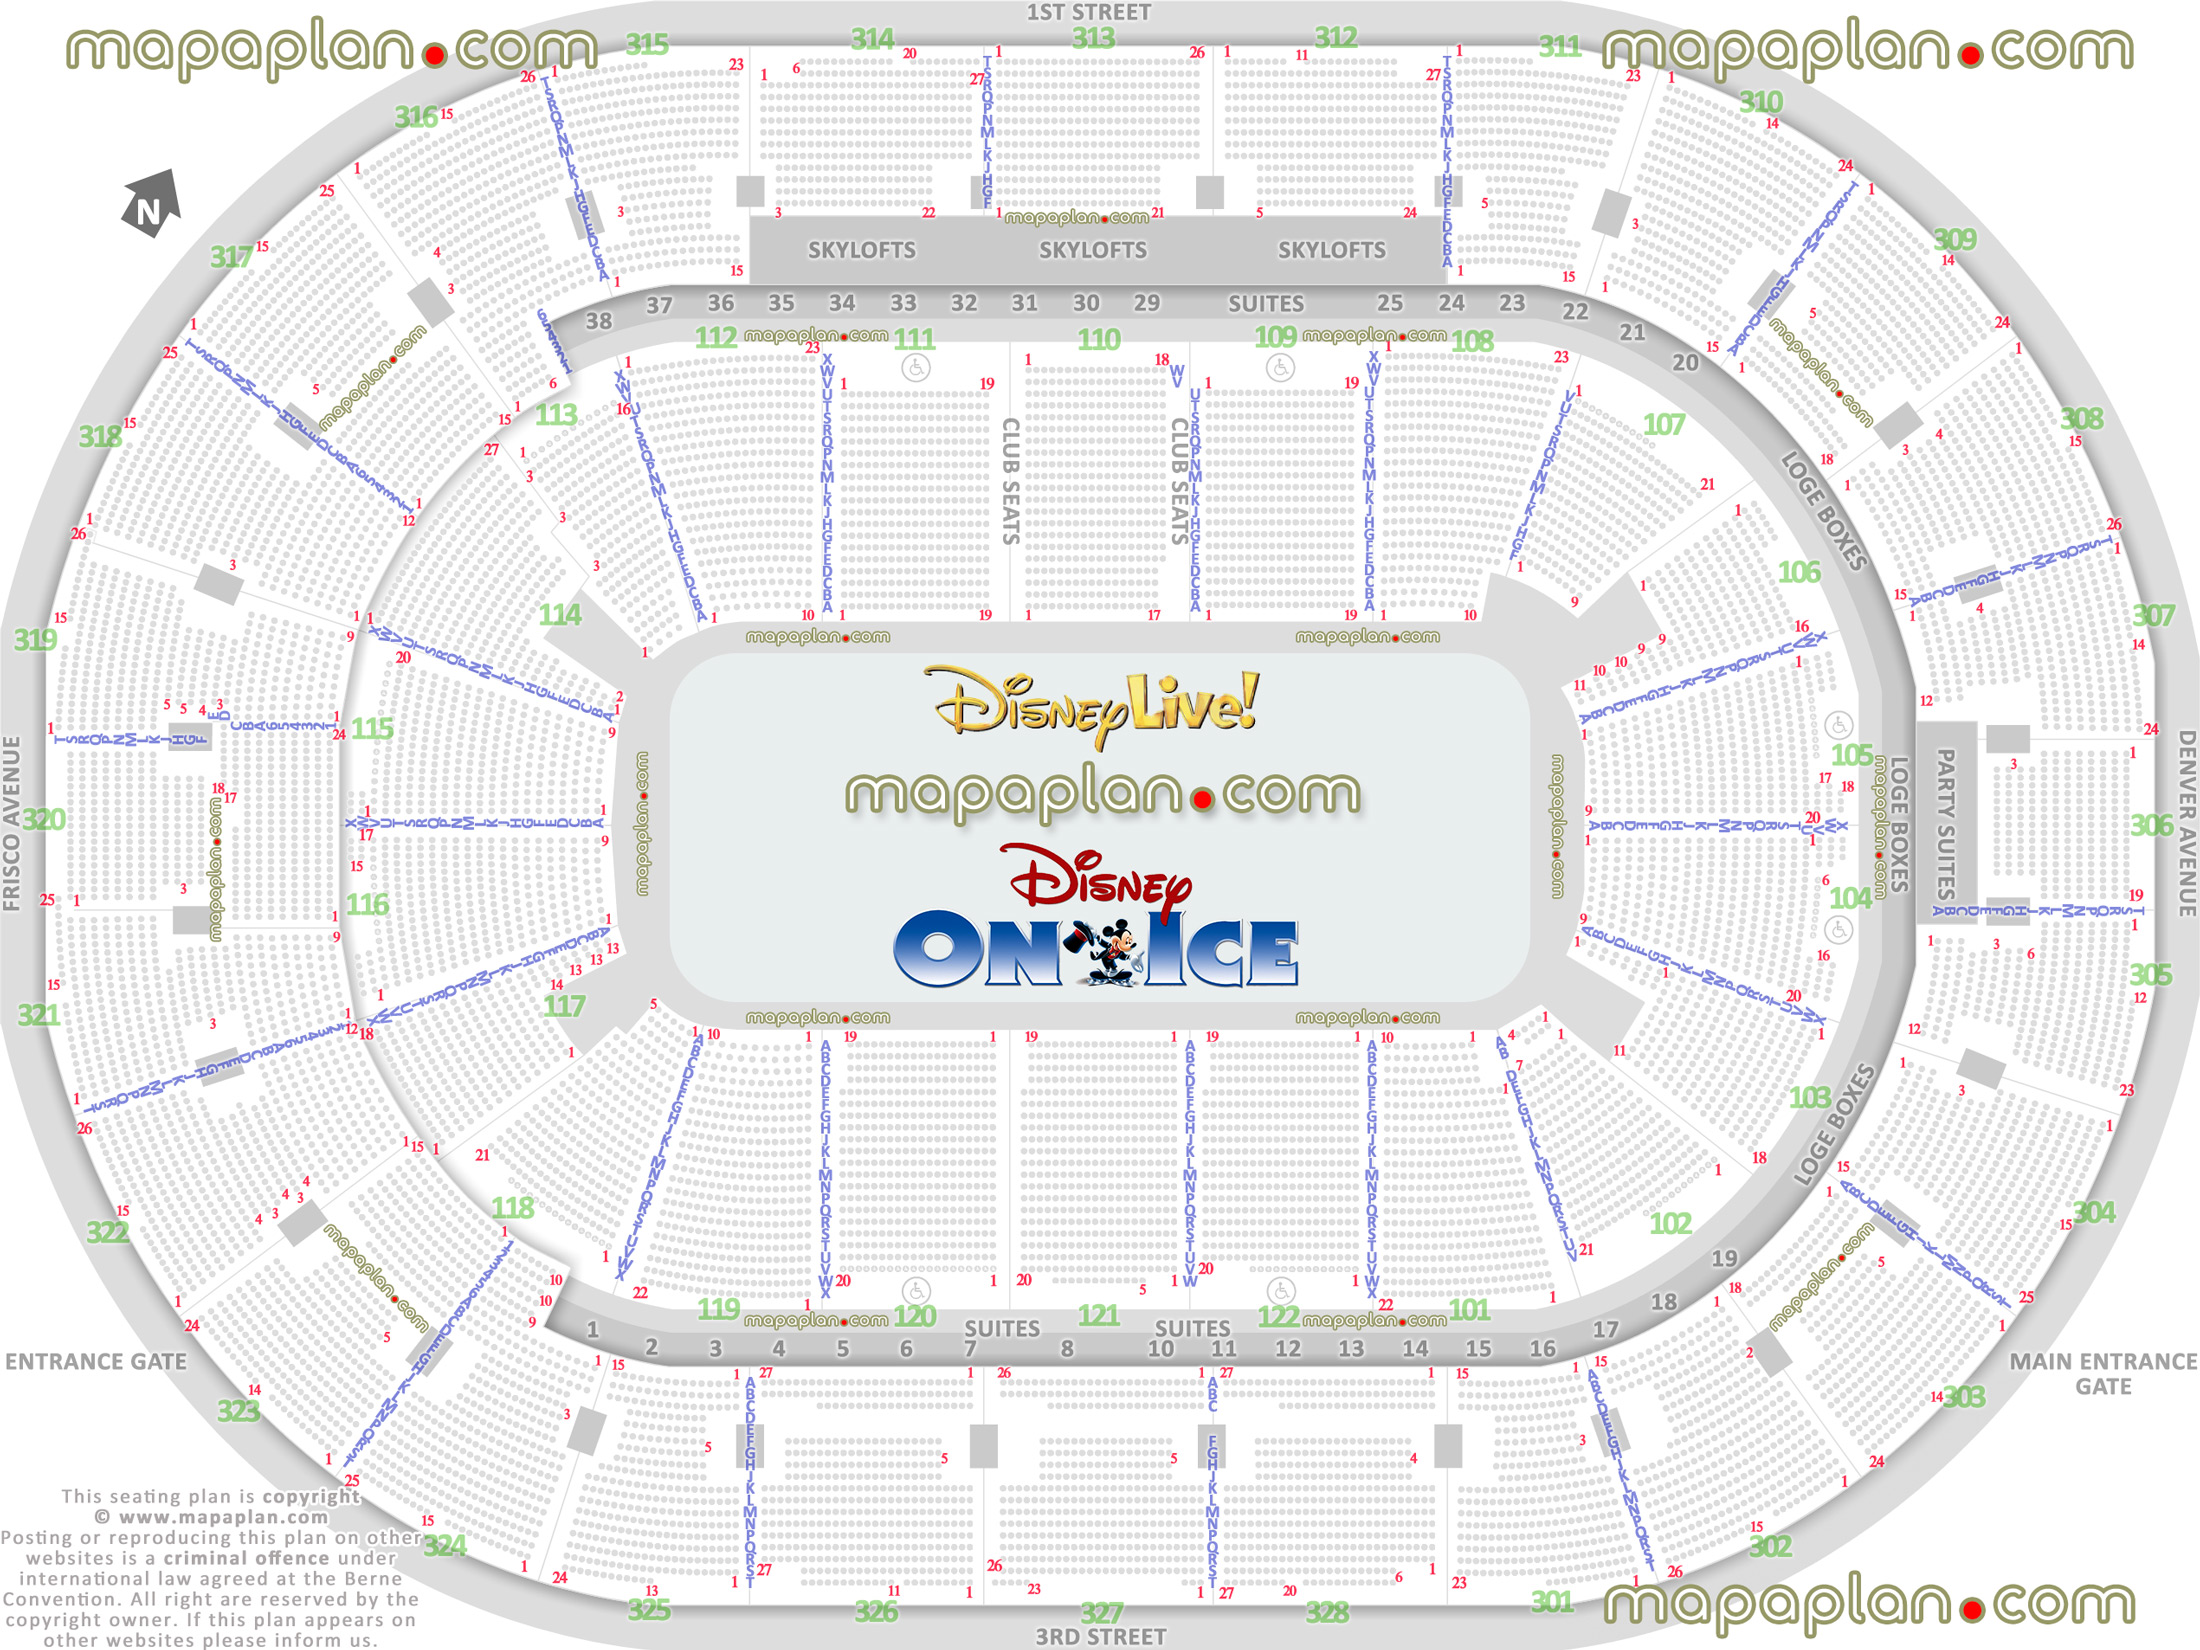 disney live disney ice arena chart best seat finder 3d tool precise detailed aisle seat row numbering location data plan event floor level lower upper balcony terrace premium loge boxes party suites skylofts layout main entrance gate exits map Tulsa BOK Center seating chart